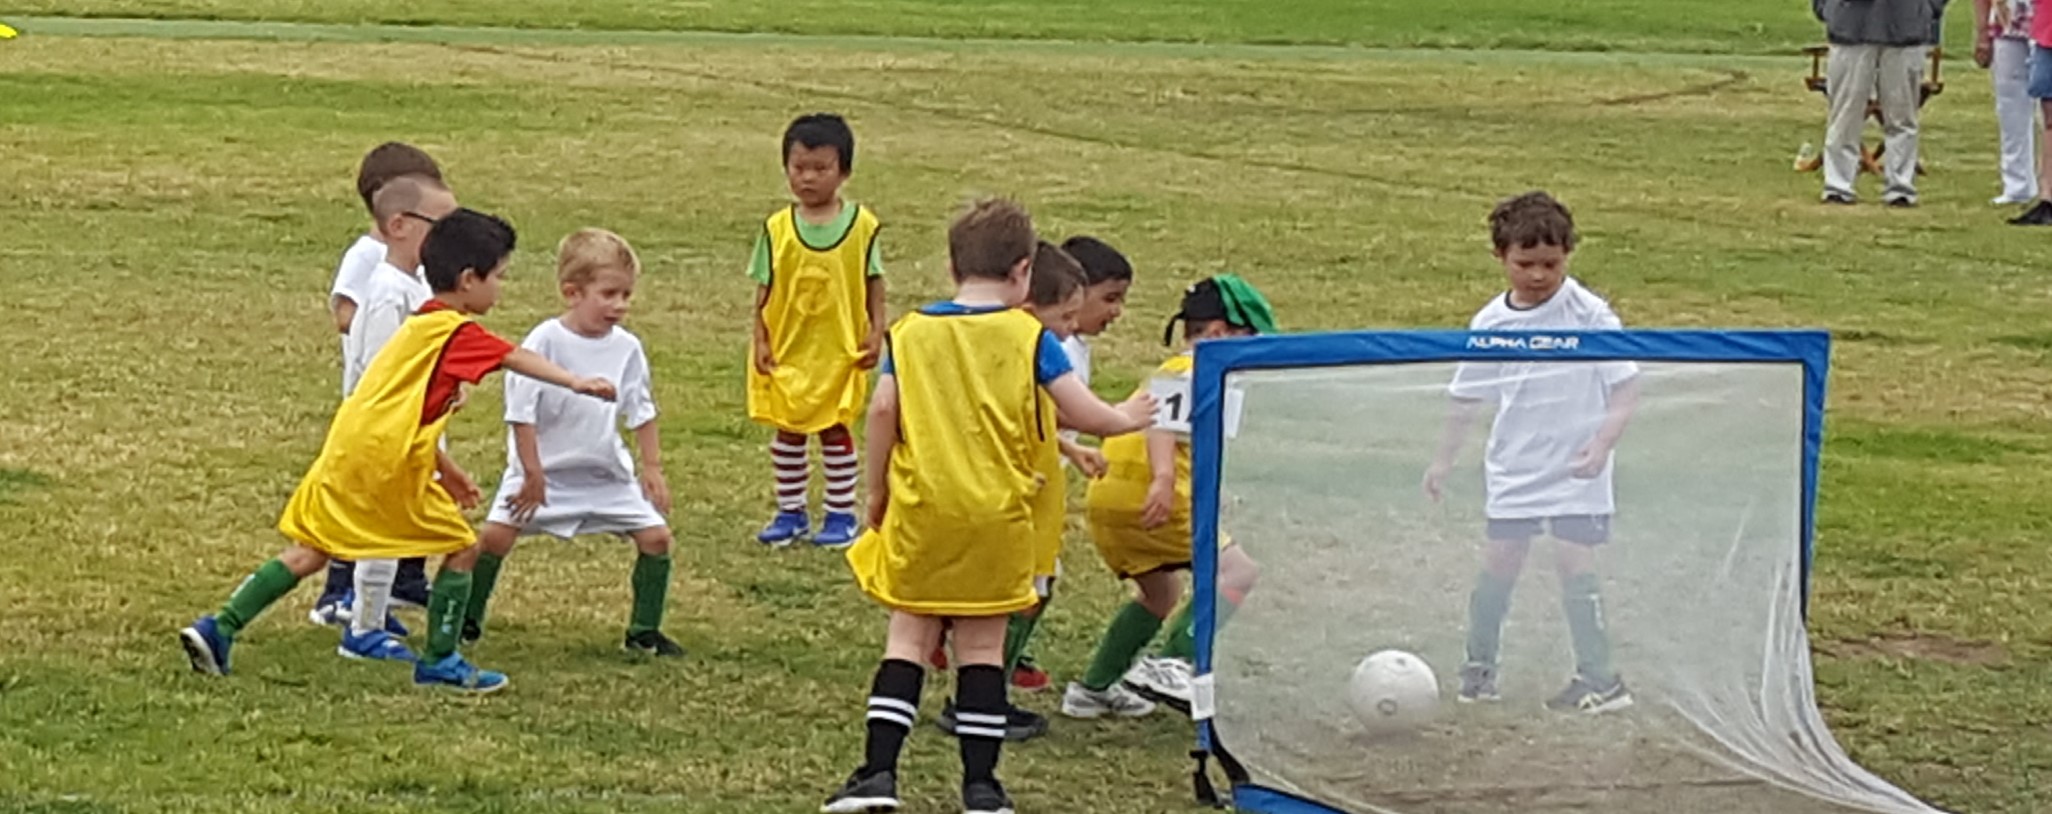 Football Skills for 4 and 5 year olds